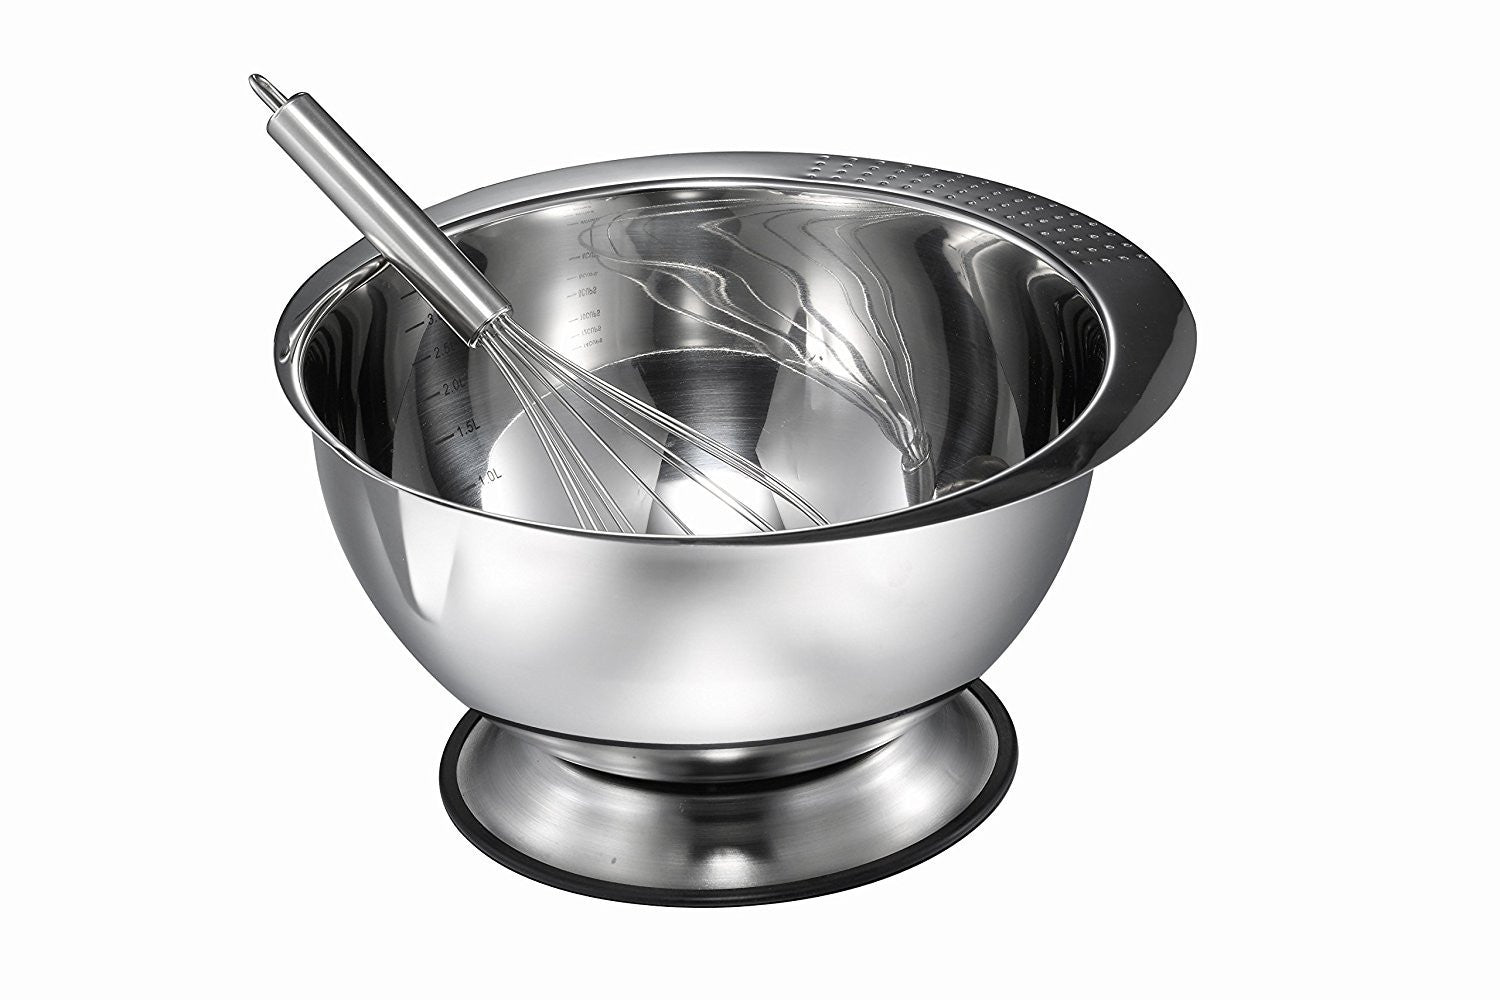 [1 Pack] 8 Quart Large Stainless Steel Mixing Bowl - Baking Bowl, Flat Base  Bowl, Preparation Bowls - Great for Baking, Kitchens, Chef's, Home use by